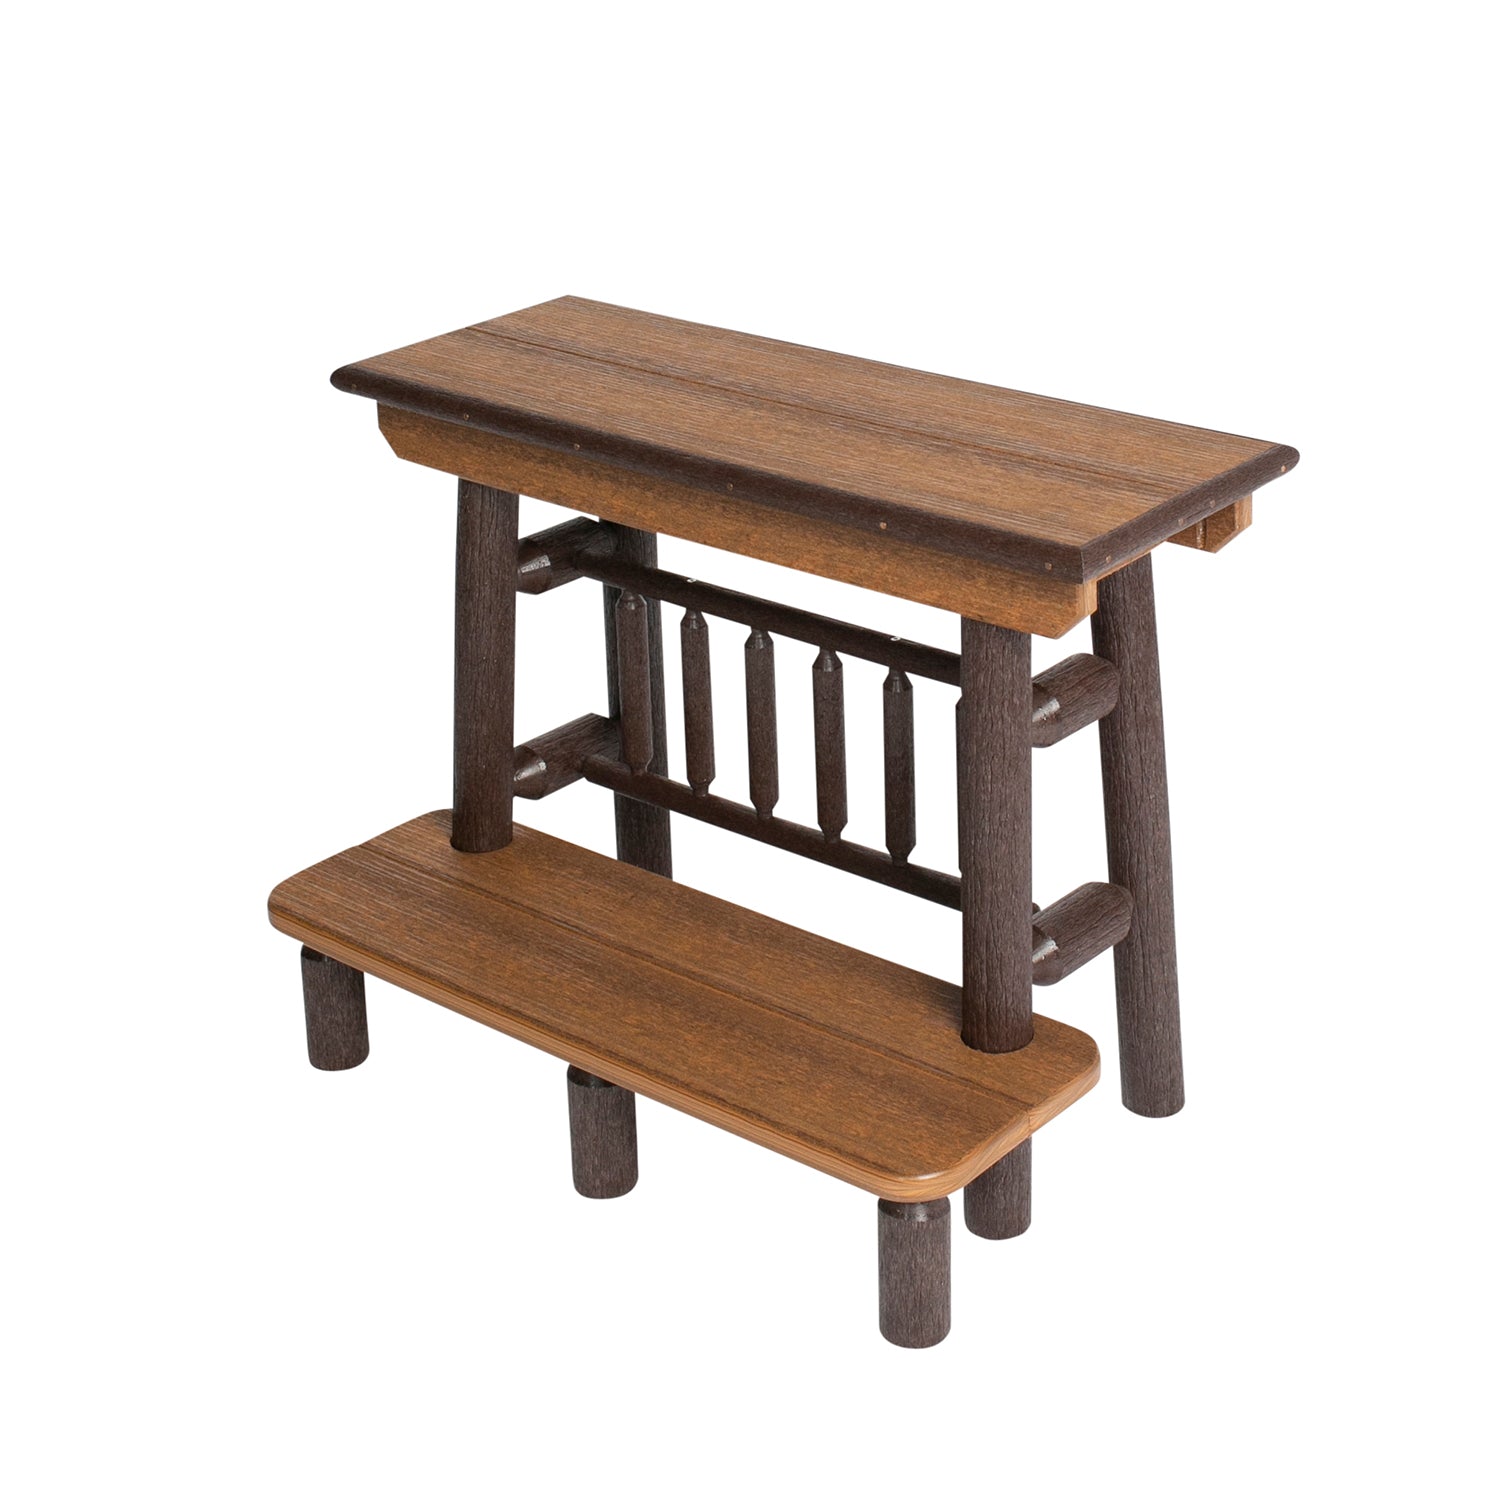 Great Woods Rustic PolyLog Balcony Height Dining Bench